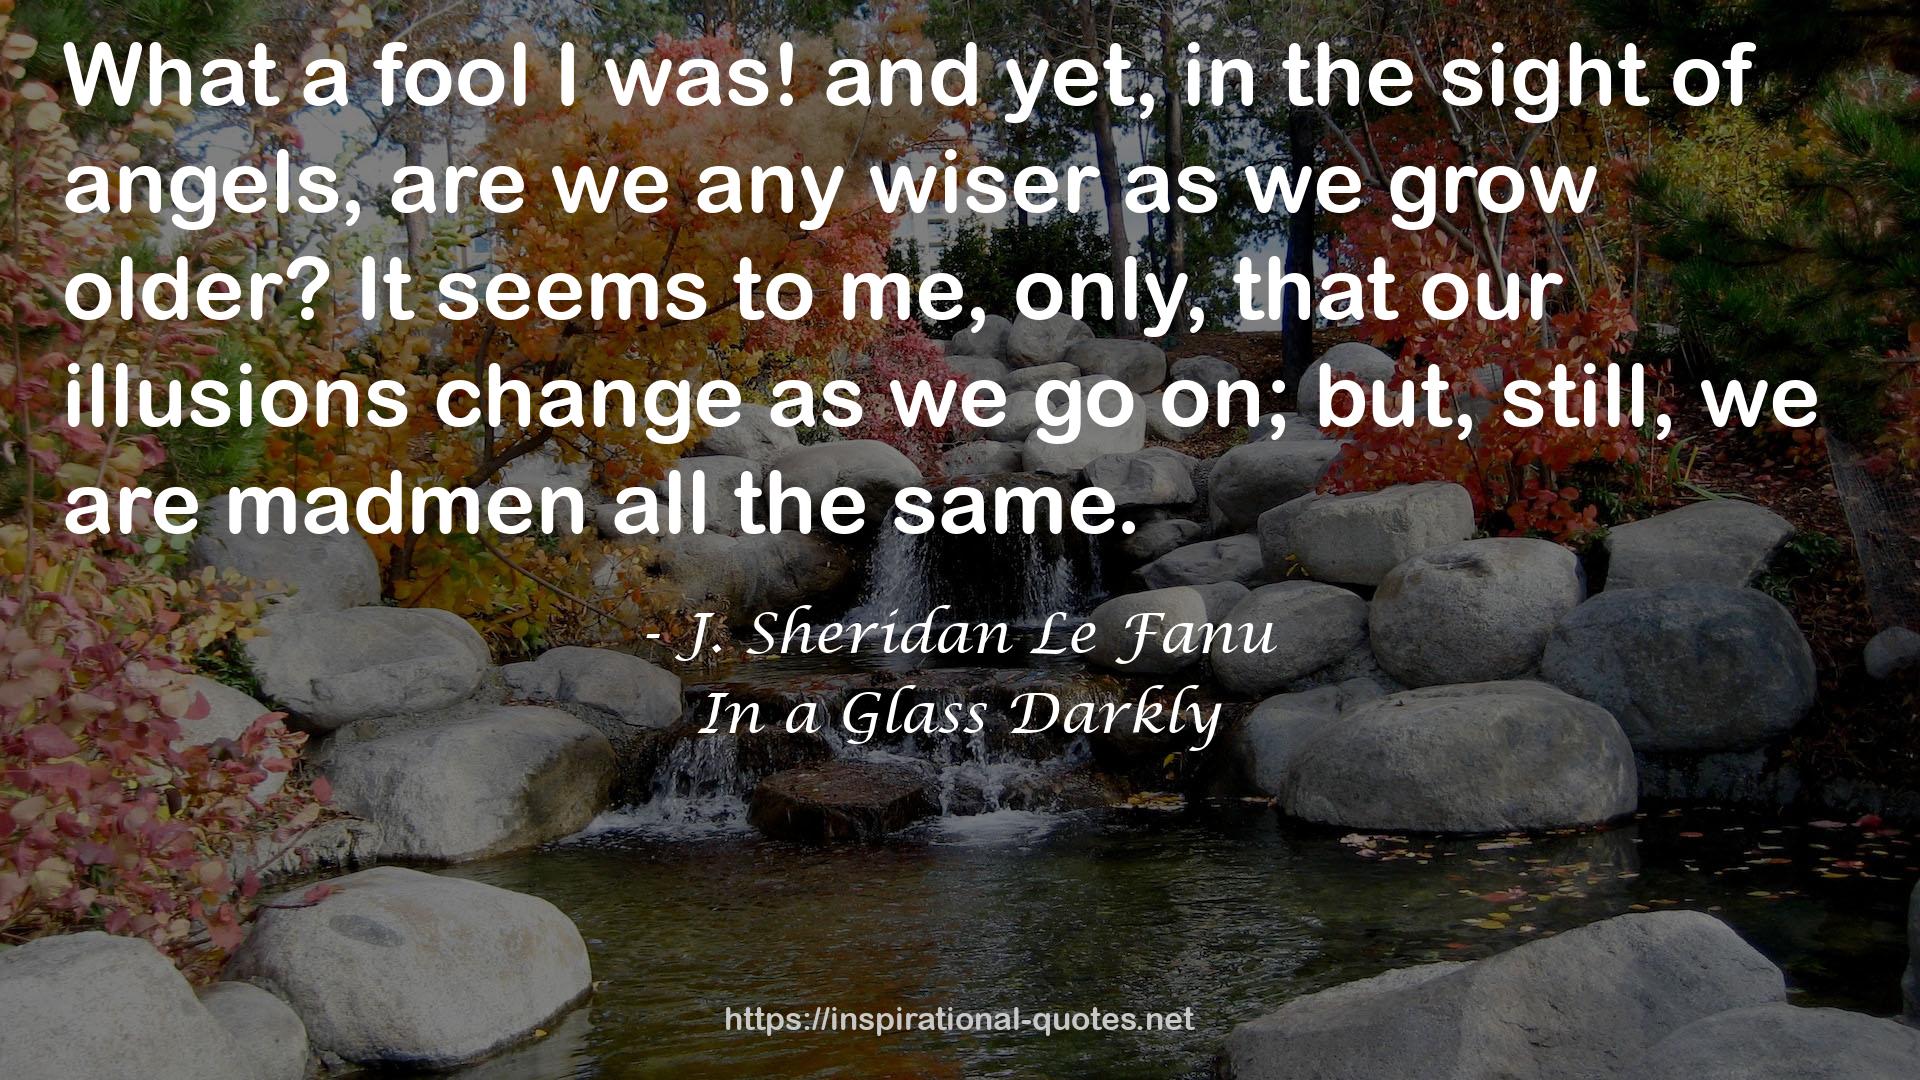 In a Glass Darkly QUOTES